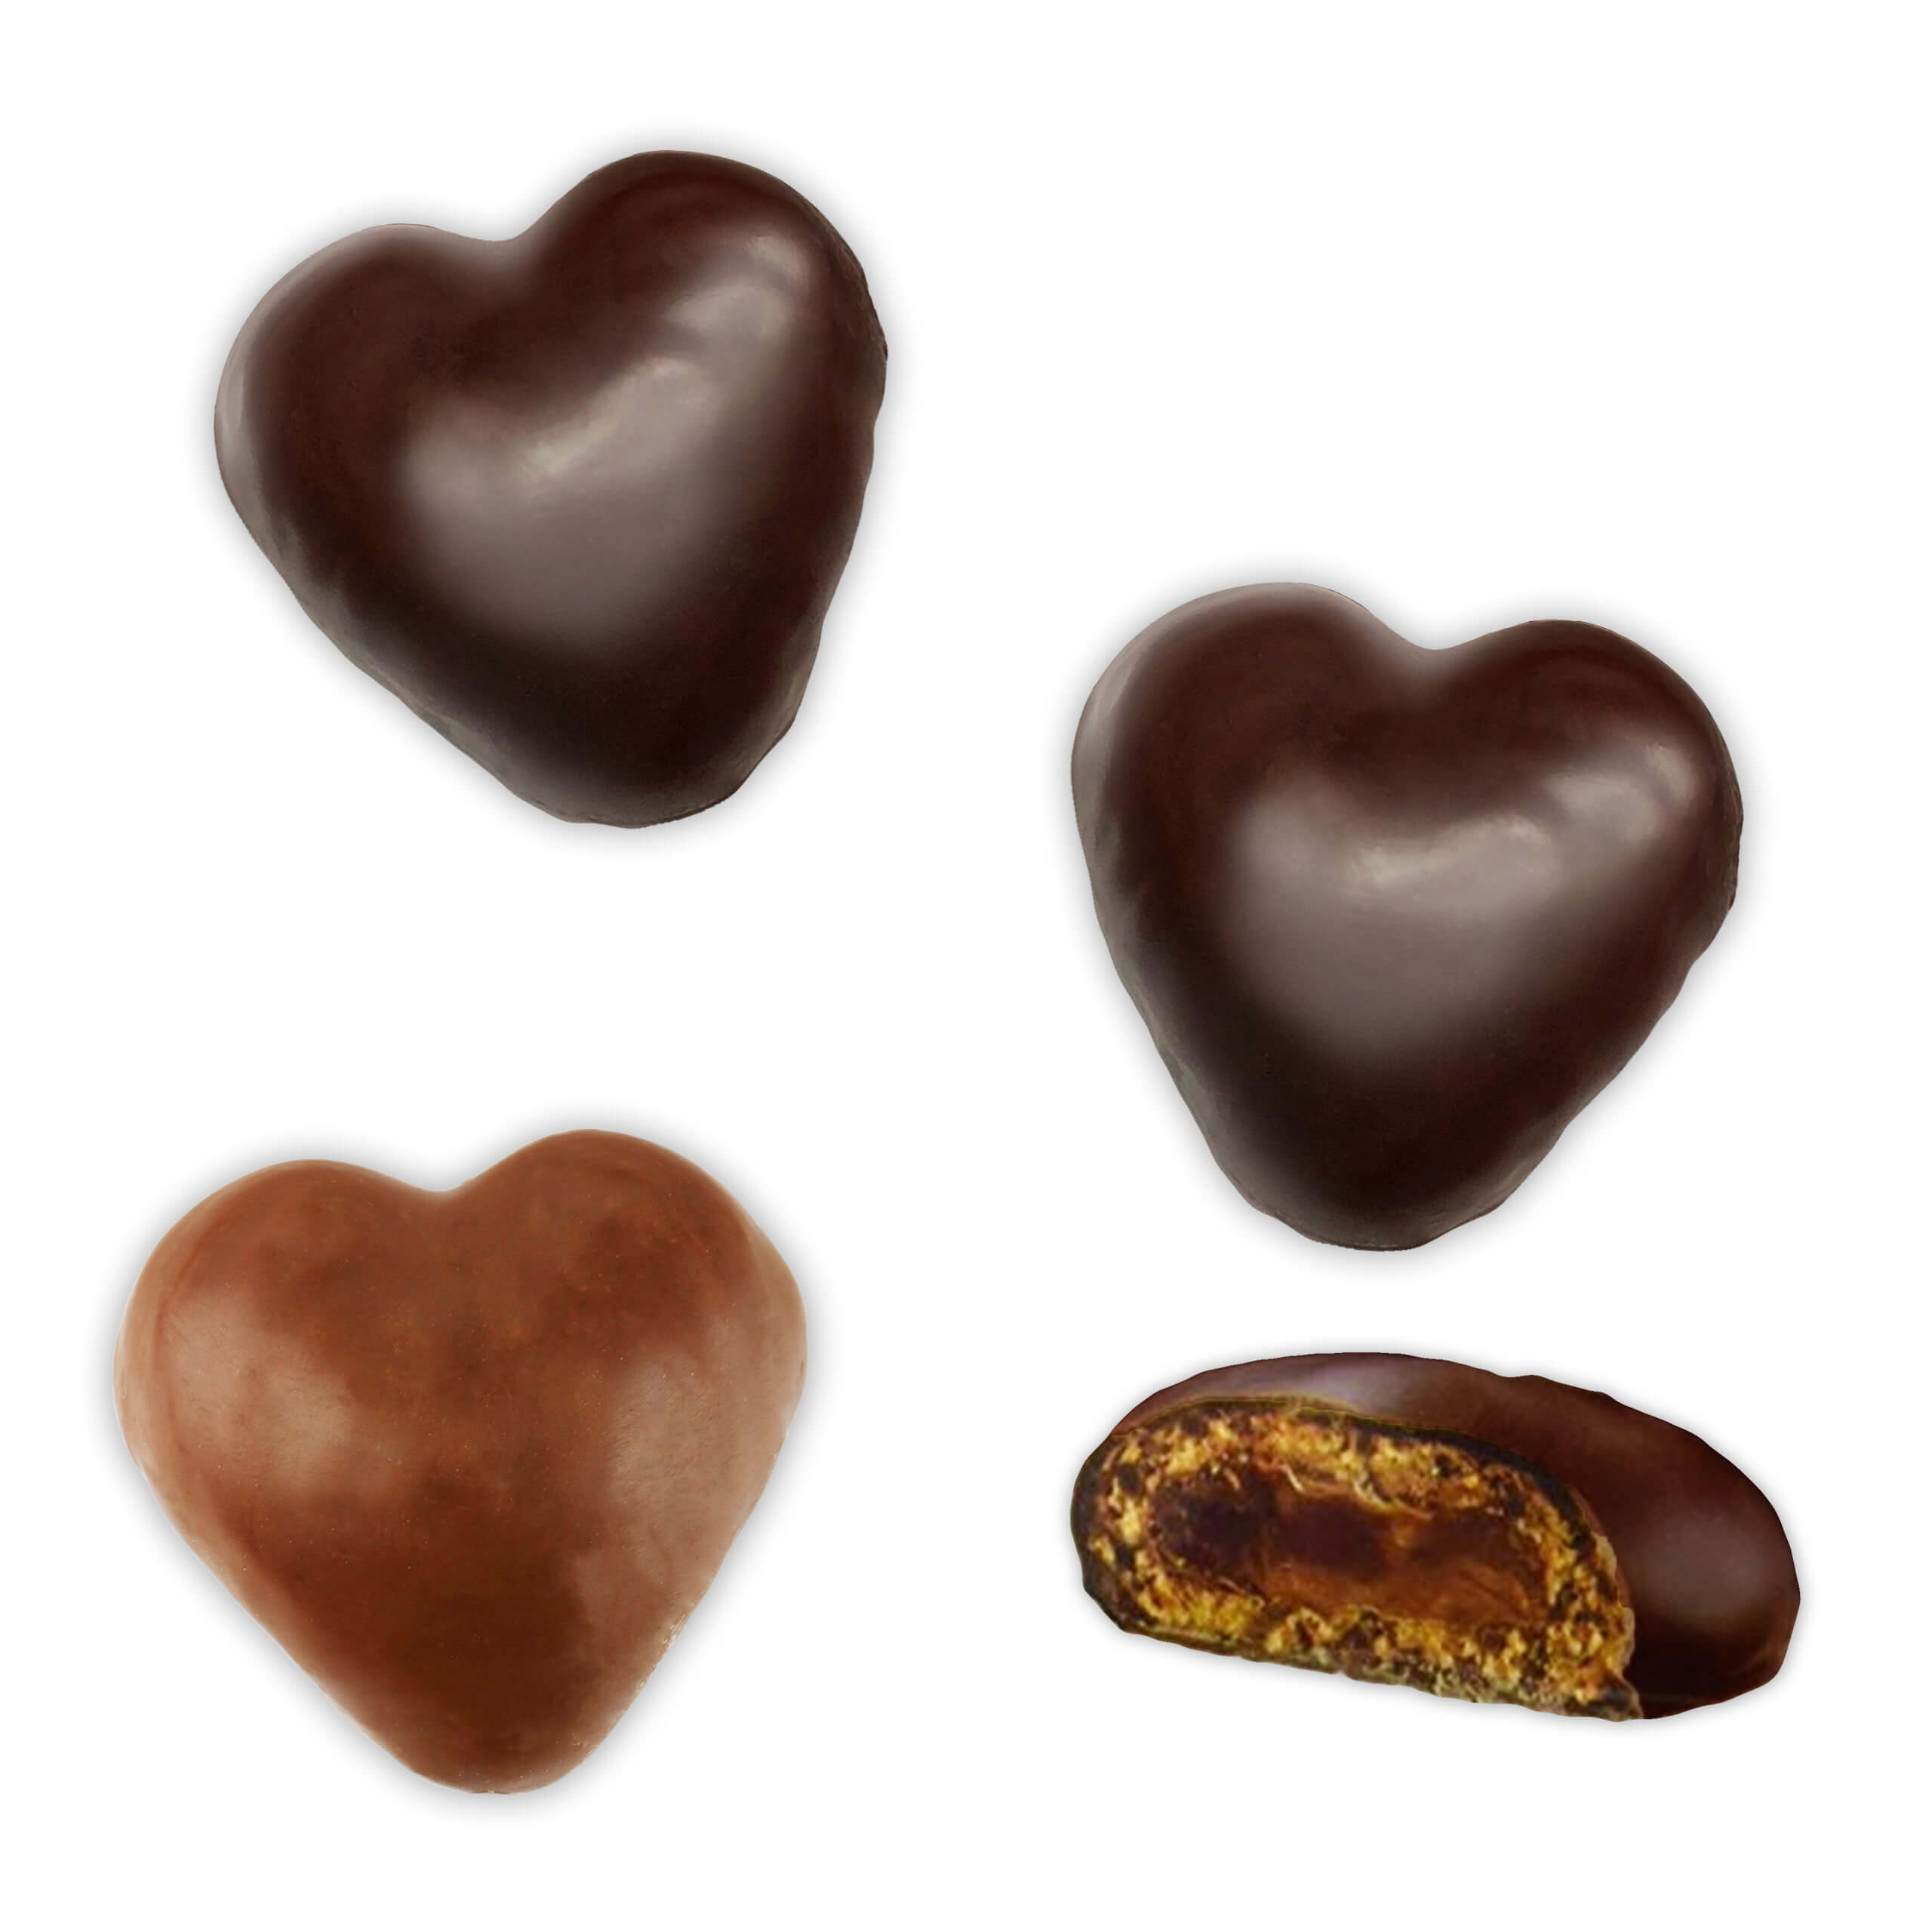 Varieties Overview of chocolate gingerbread hearts